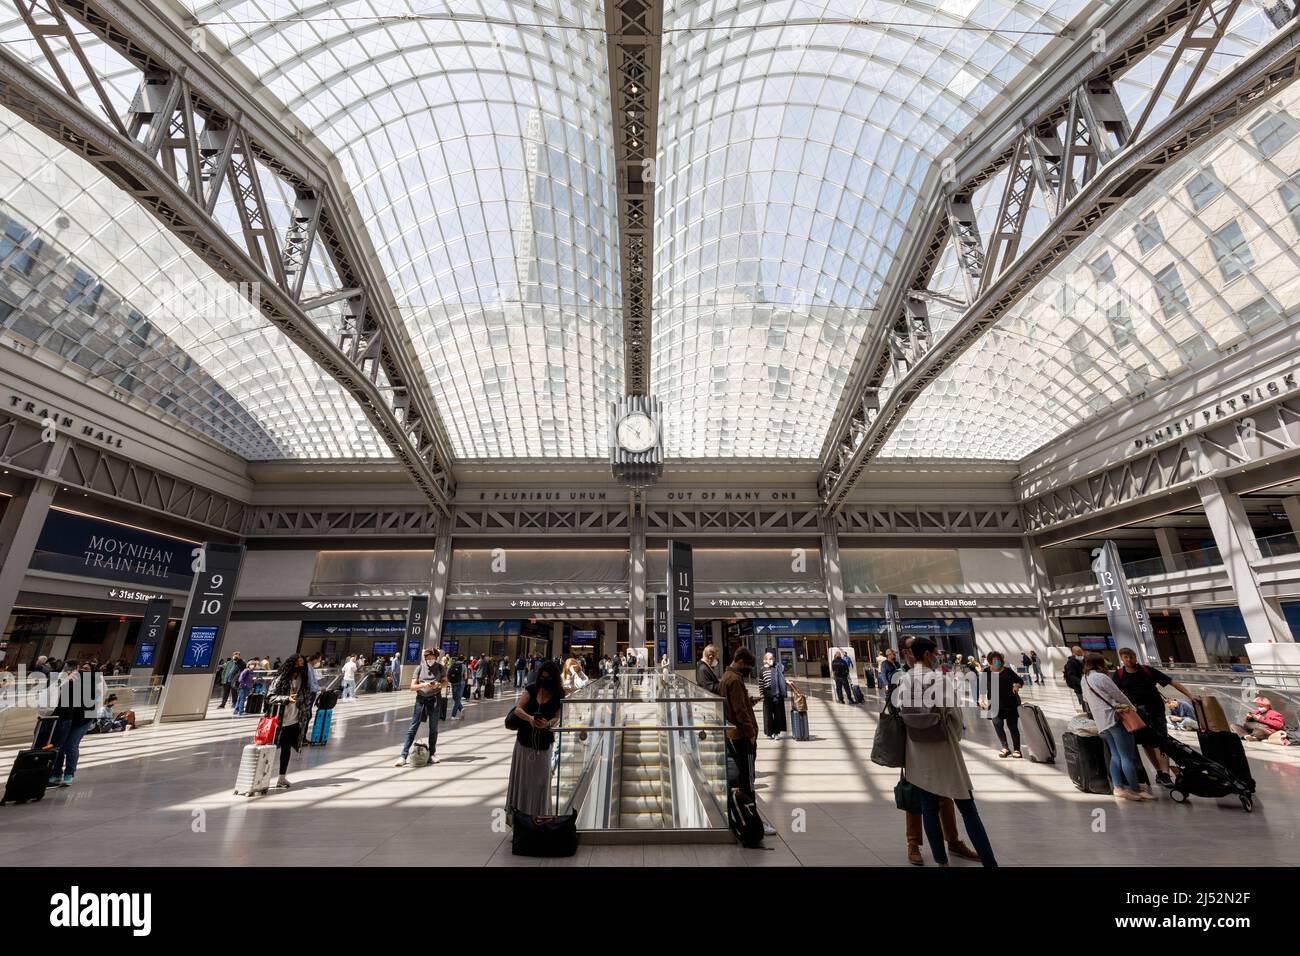 Moynihan Train Hall is an expansion of Pennsylvania Station, into the city's former main post office building, midtown Manhattan, New York, NY, USA. Stock Photo